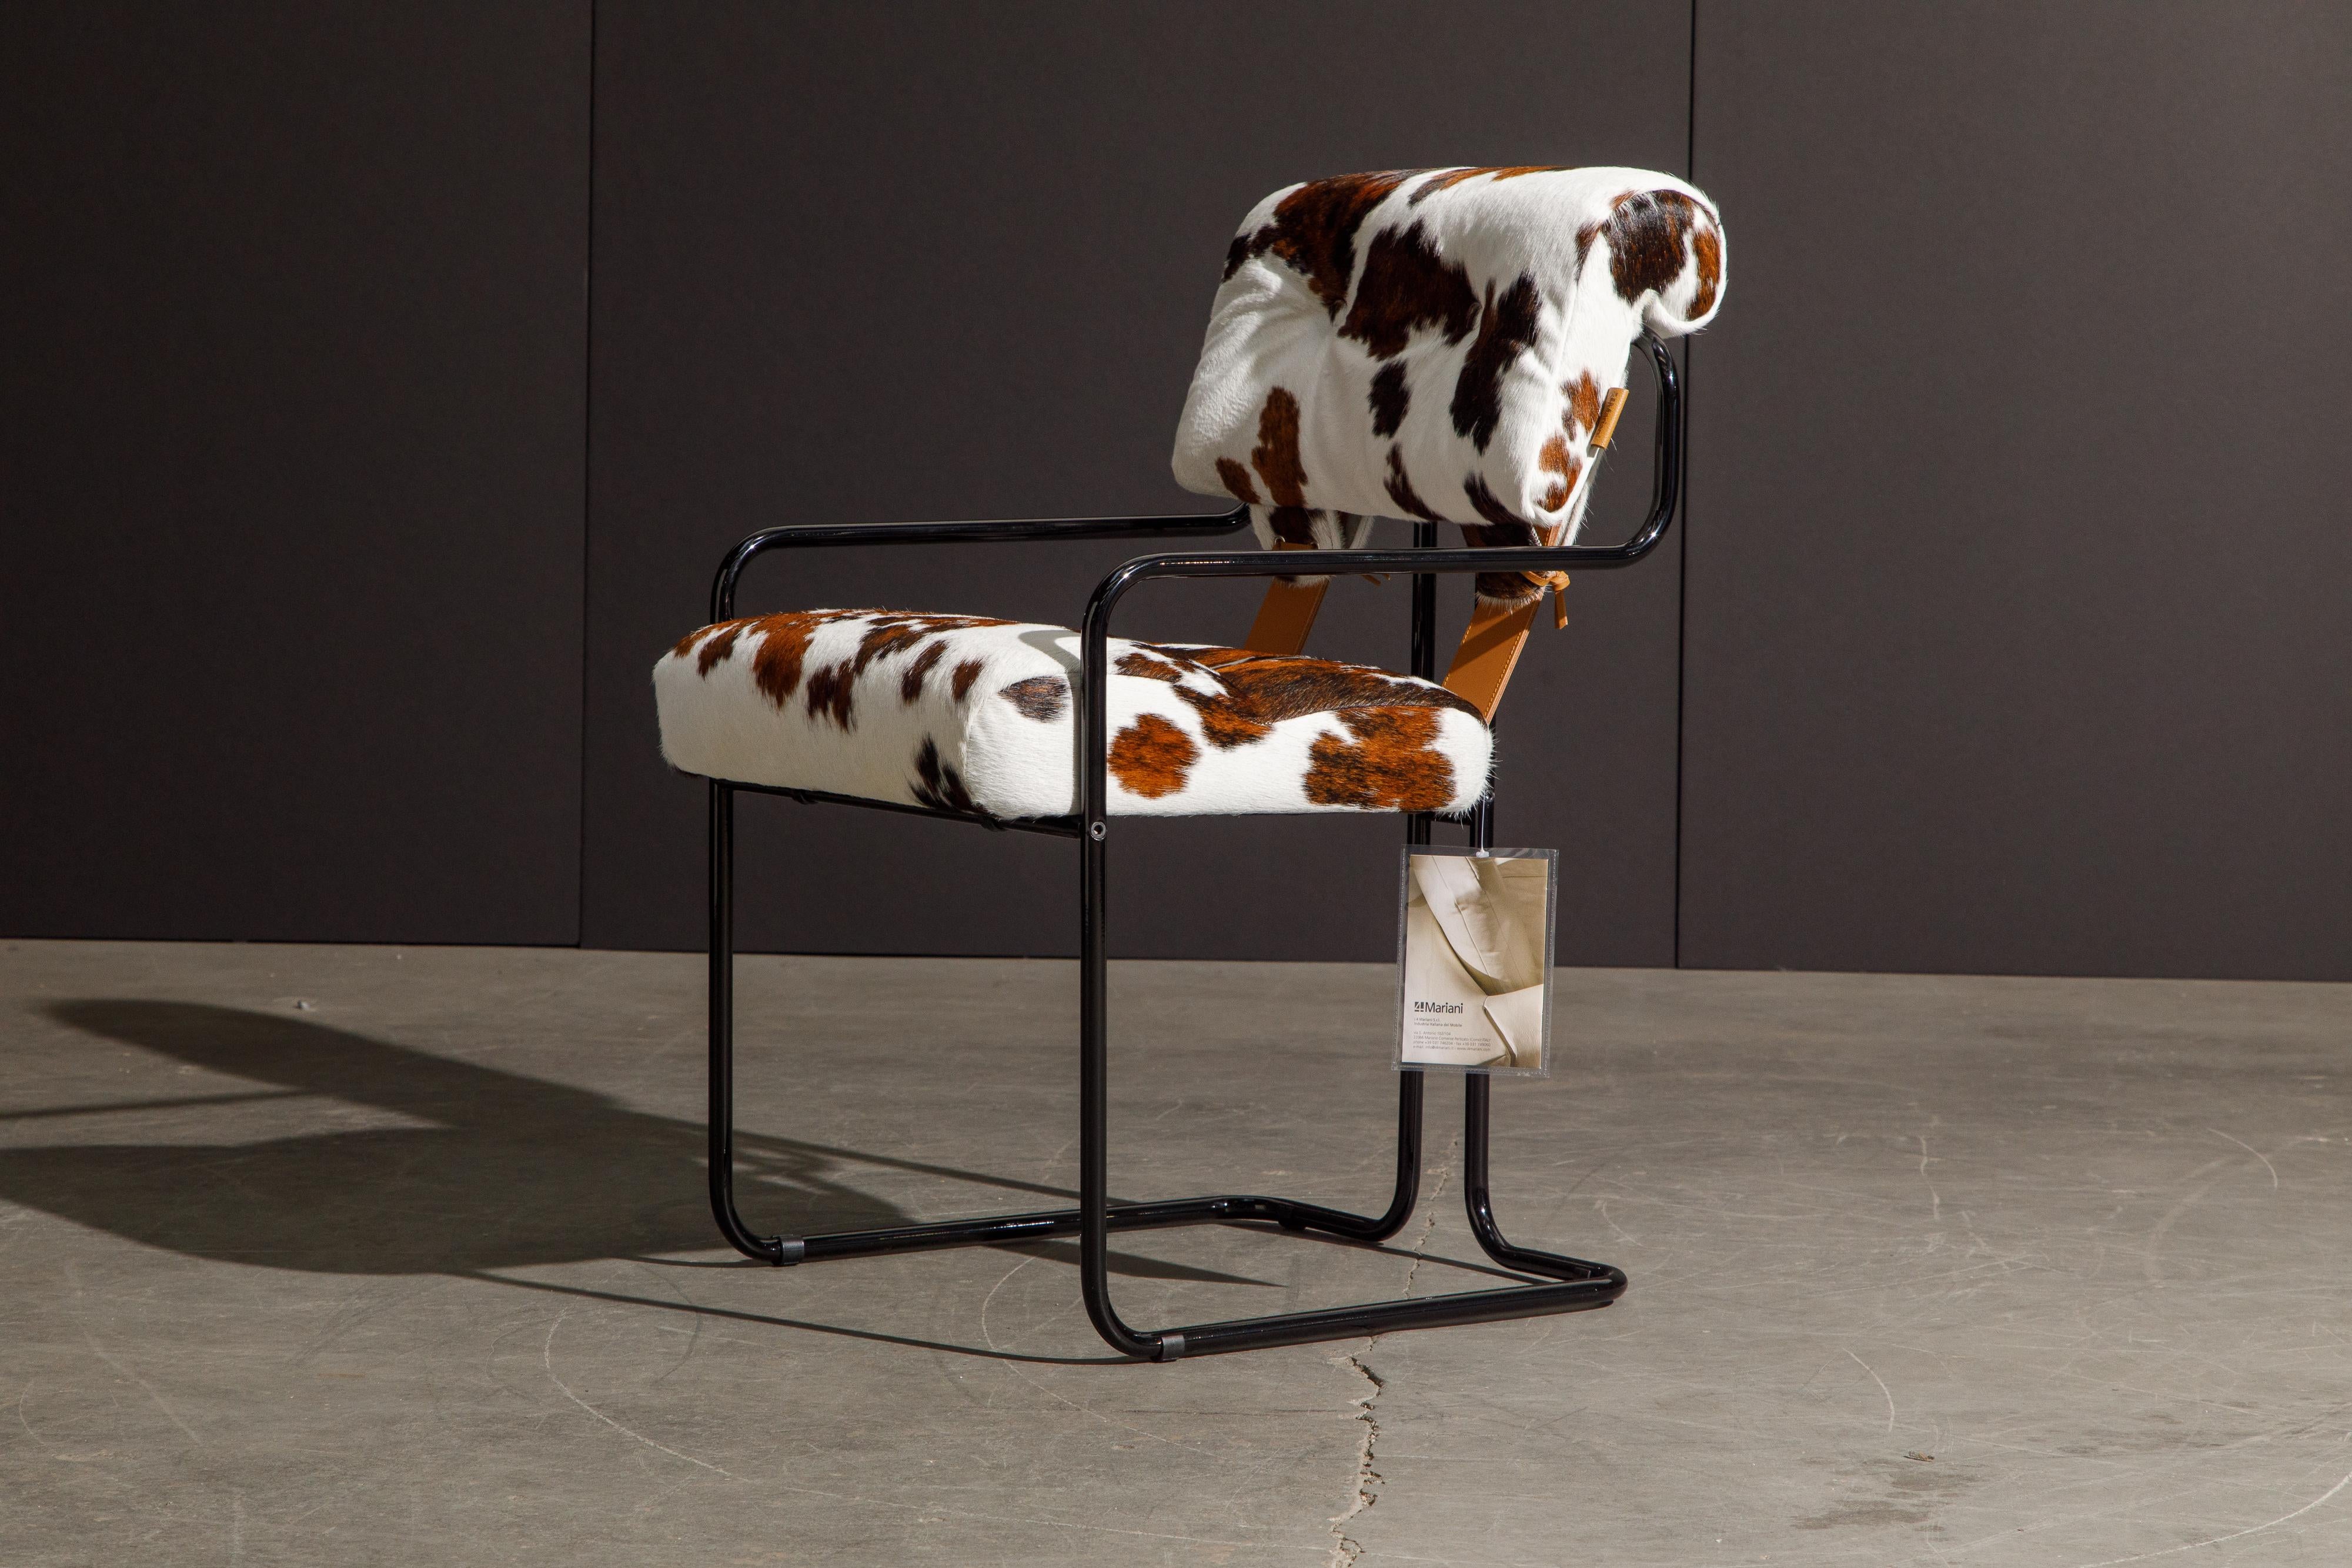 Currently, the most coveted dining chairs by interior designers are 'Tucroma' chairs by Guido Faleschini for i4 Mariani, and we have this incredible set of (6) of Tucroma armchairs in beautiful spotted brown and white cowhide leather with black